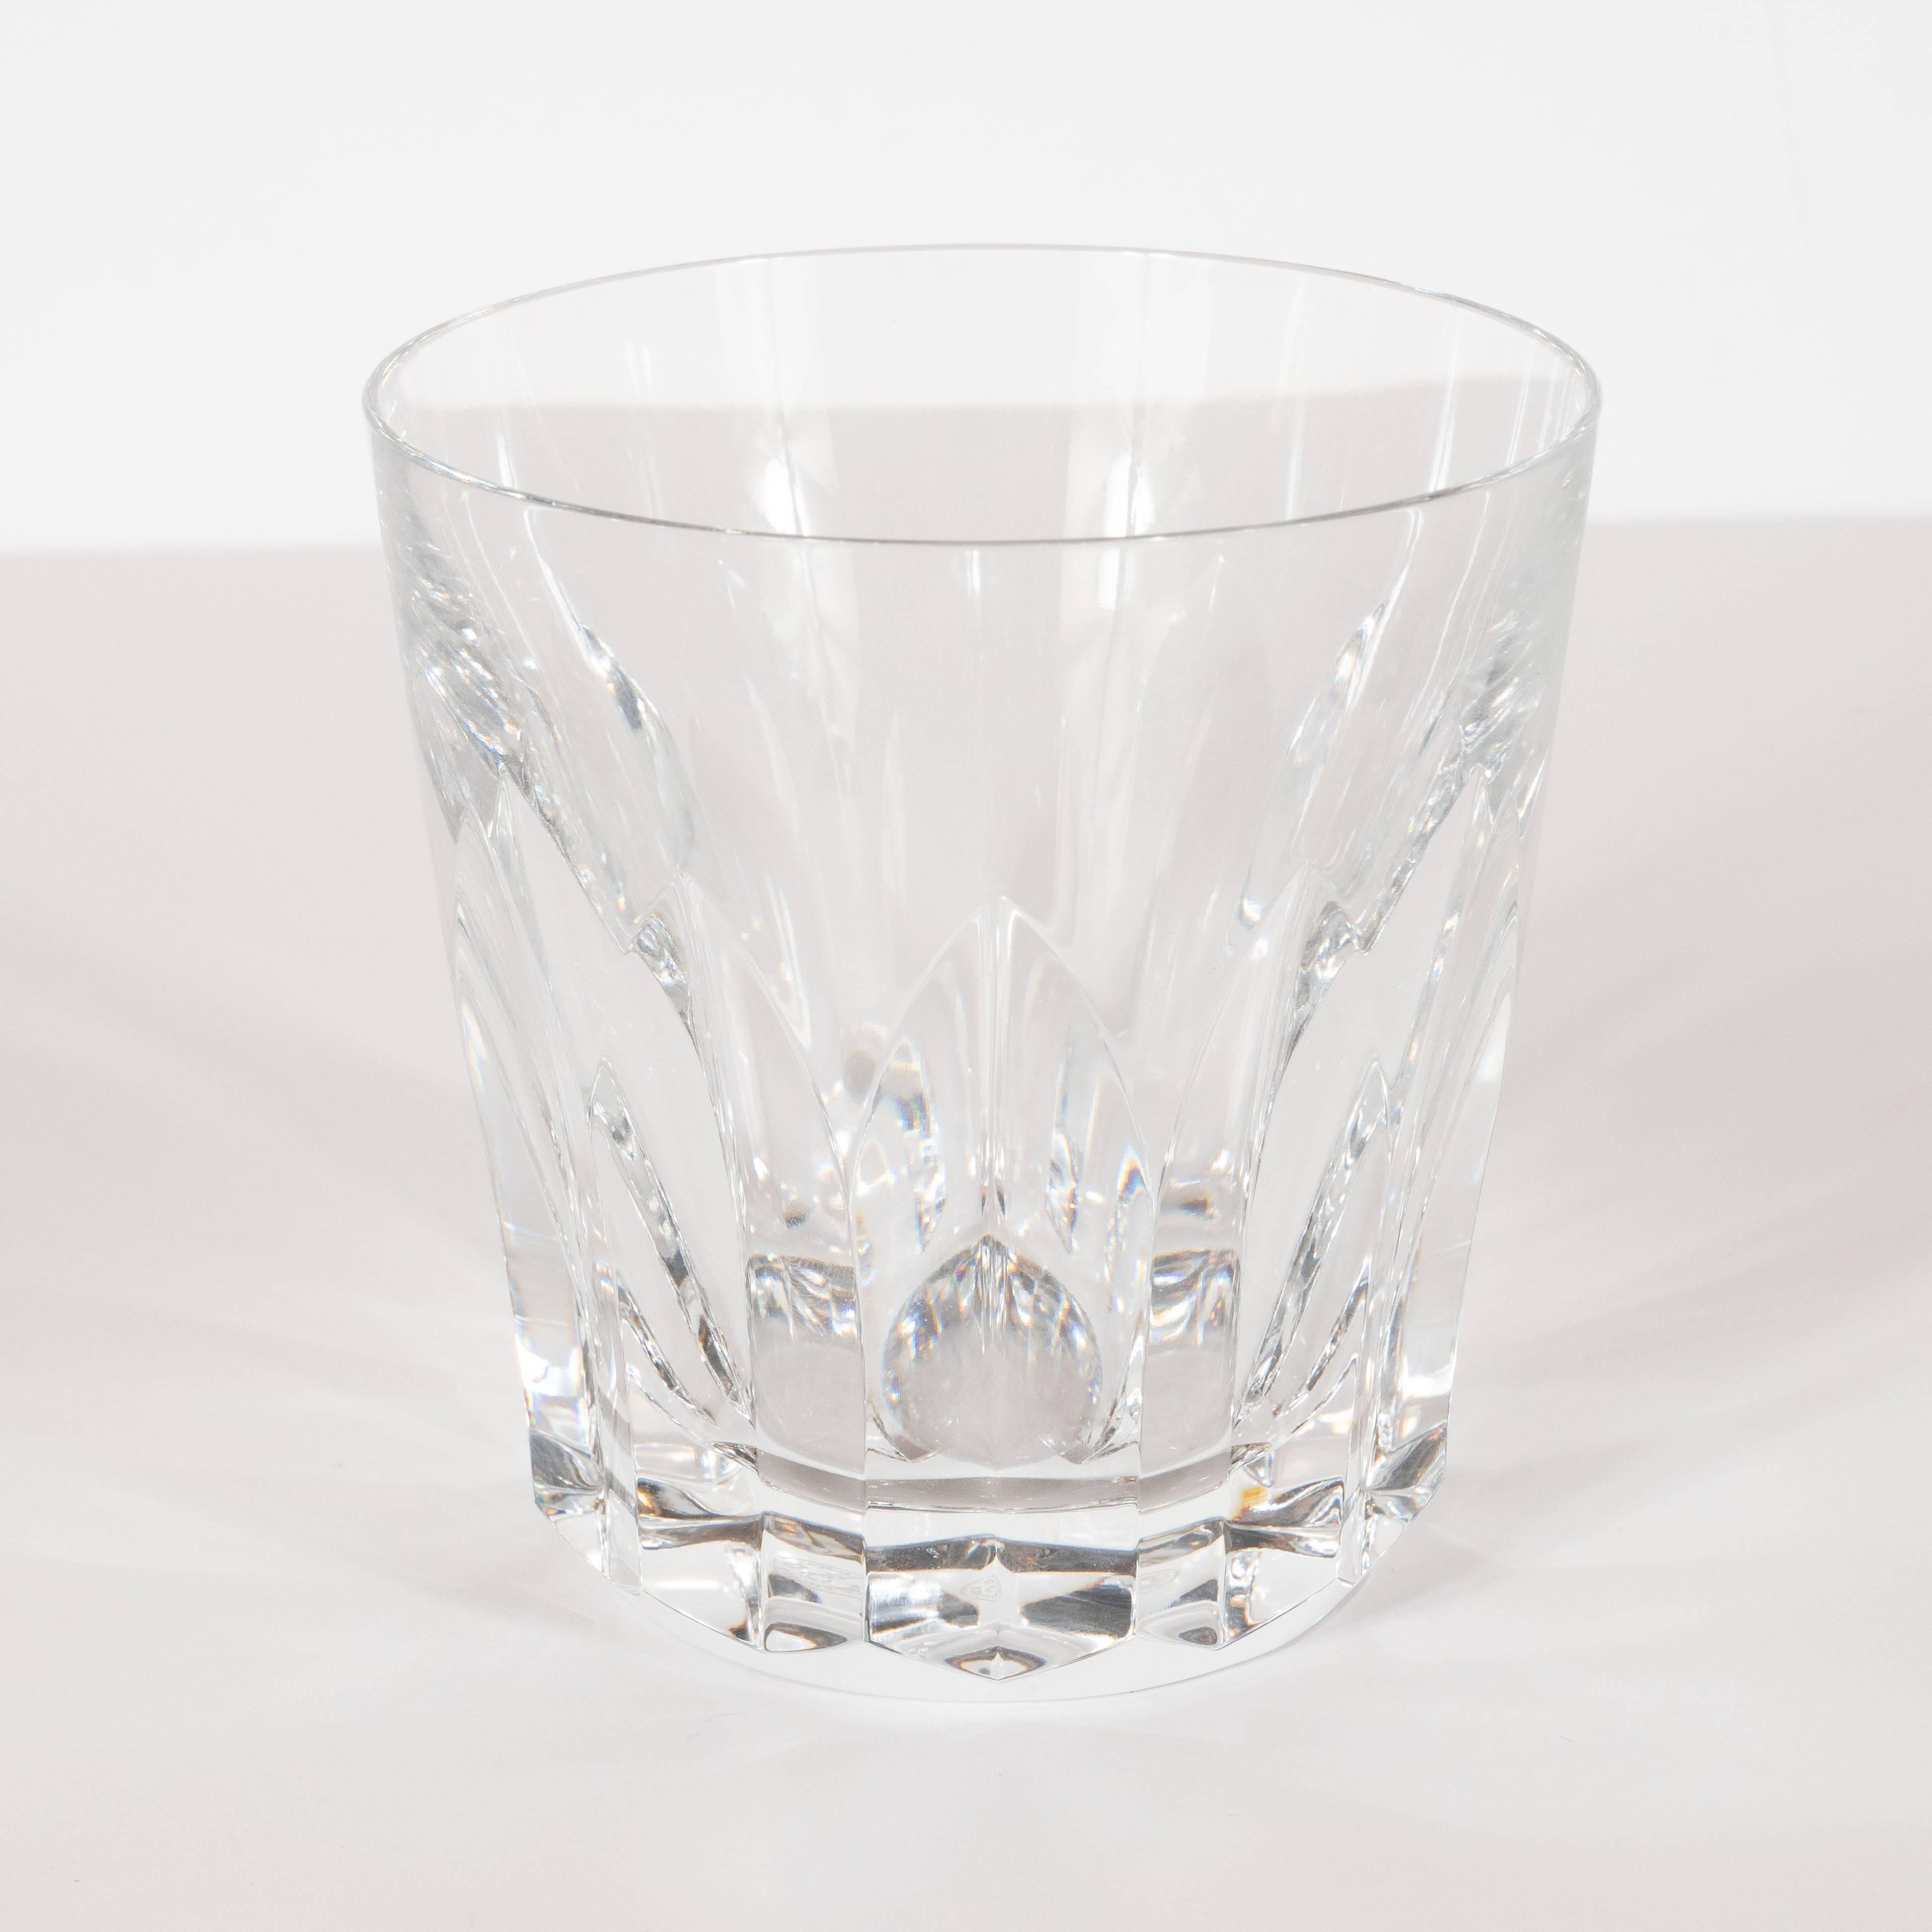 This gorgeous set of six lowball/ tumbler glasses were realized by Baccarat, circa 1970- one of the most esteemed makers of crystal, since 1764 (originally the supplier to King Louis XV). Offering Baccarat's iconic 